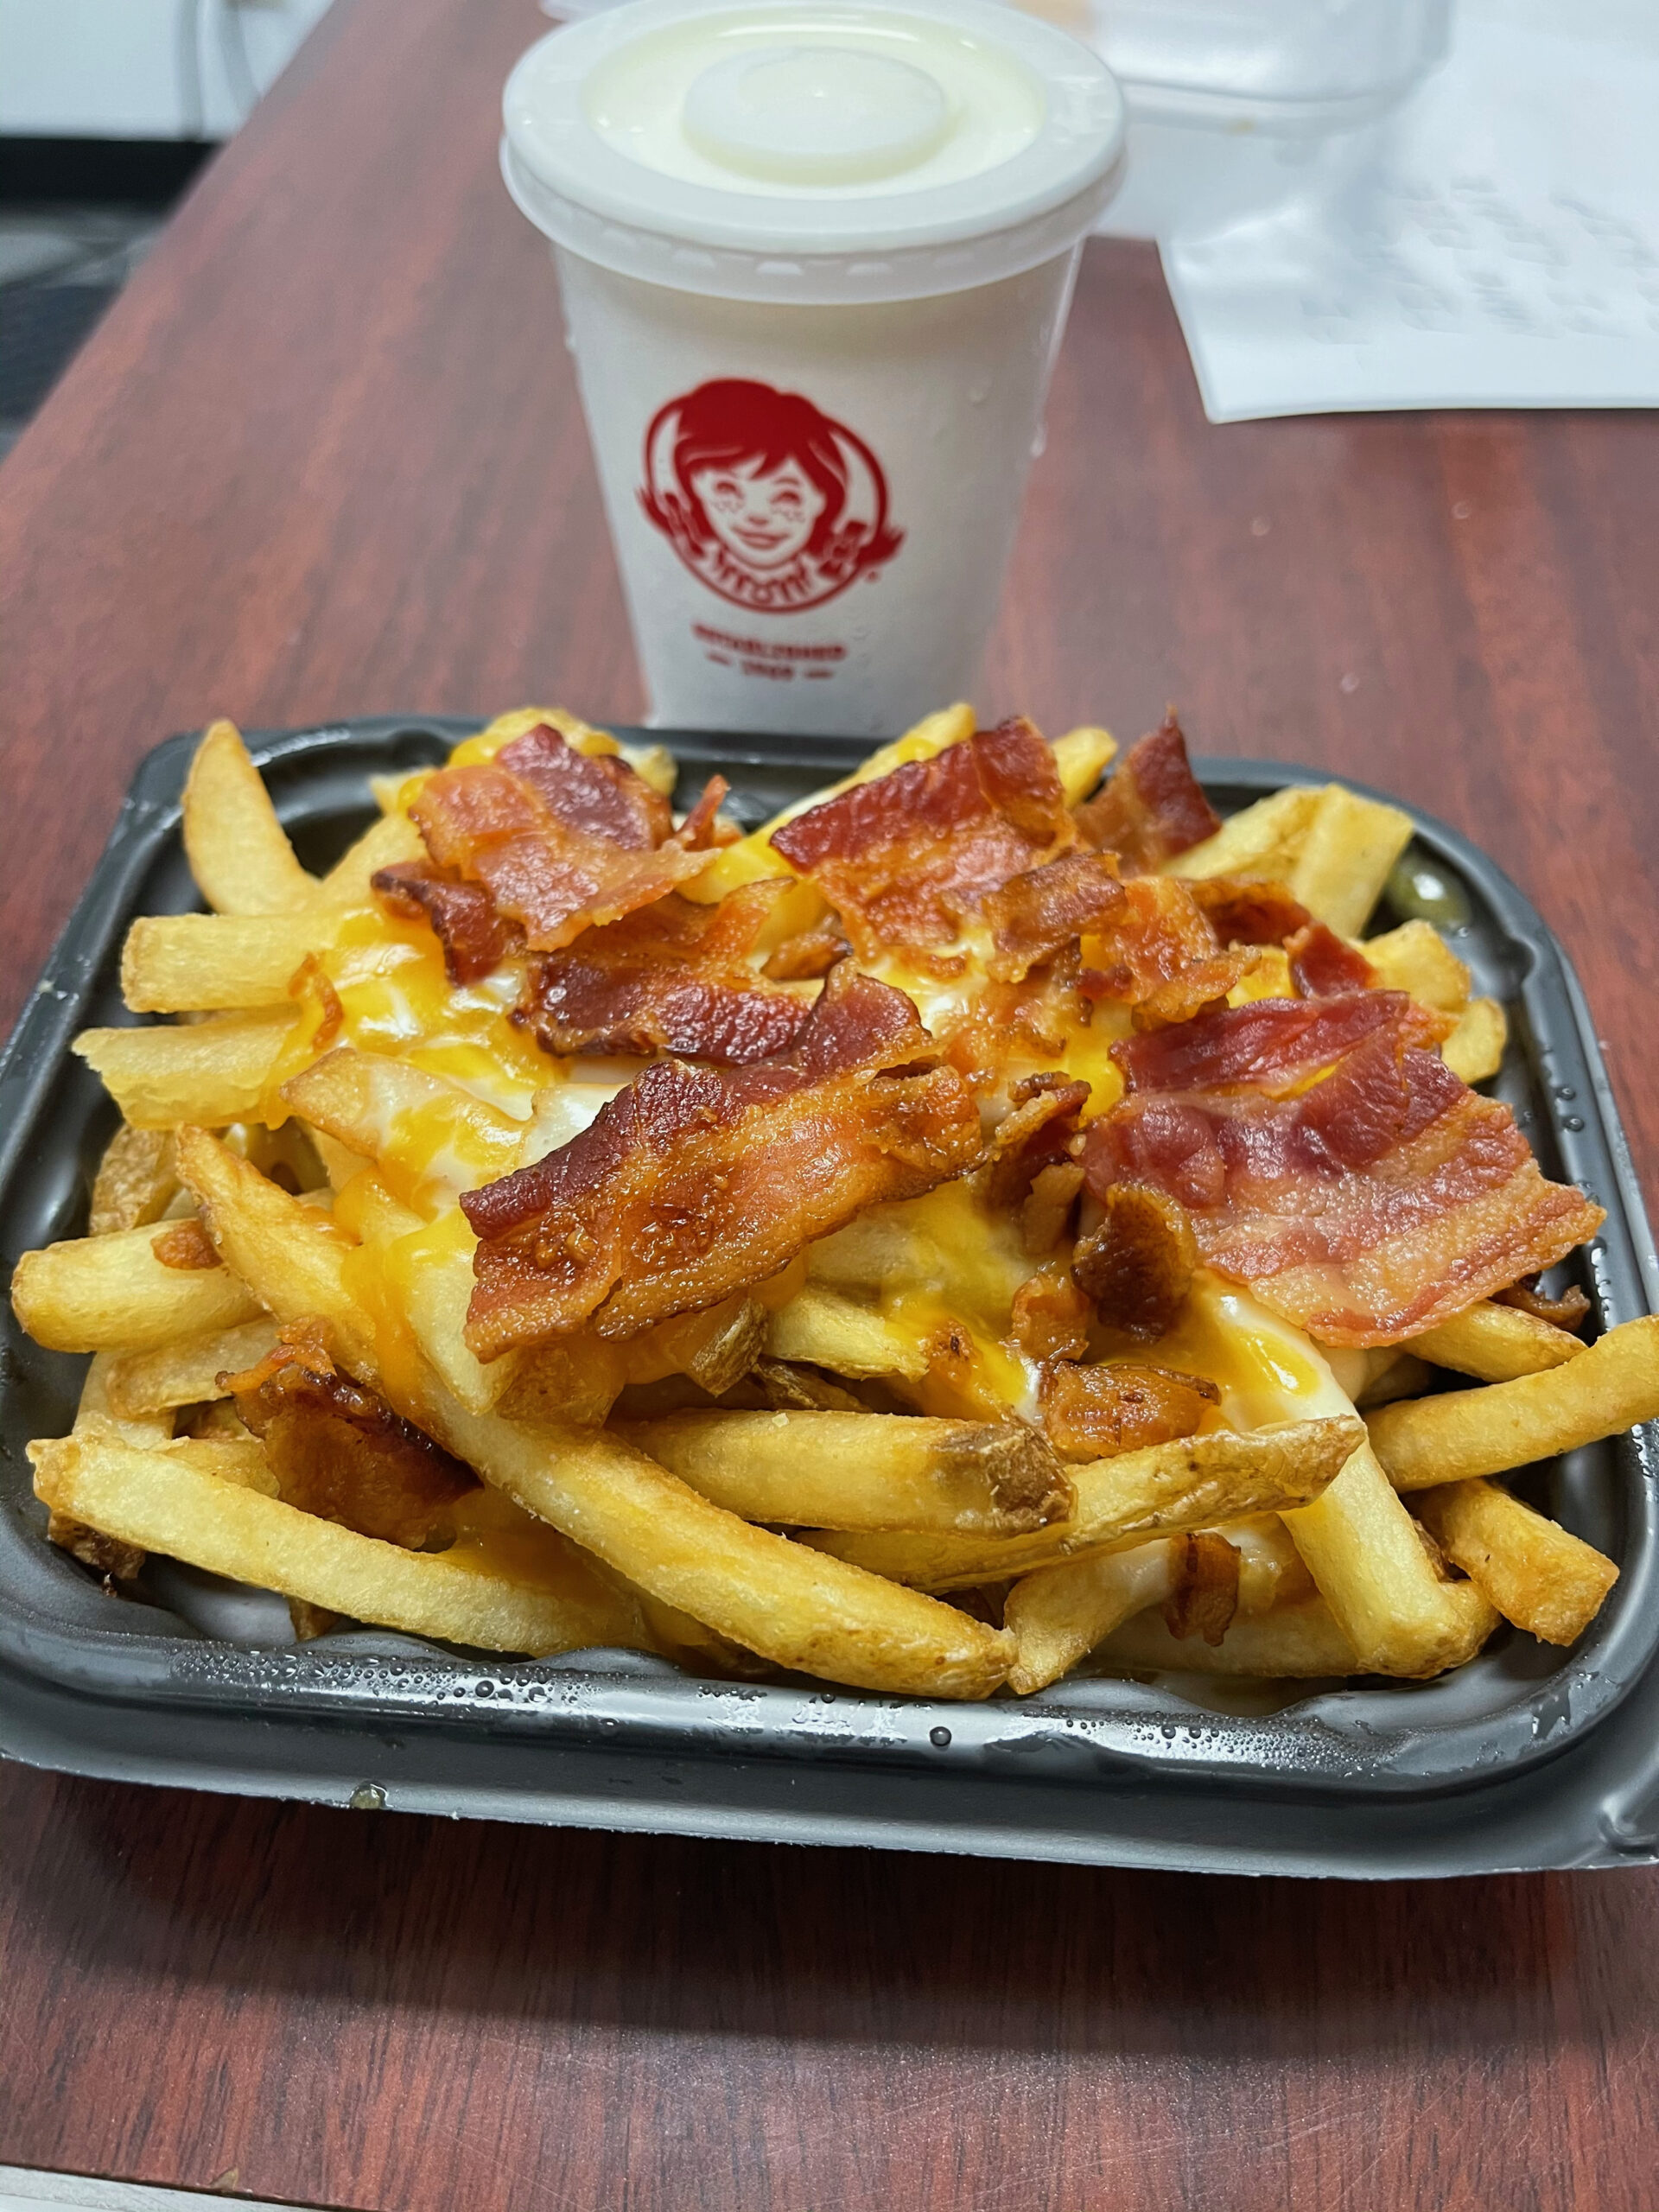 Wendy's Lunch